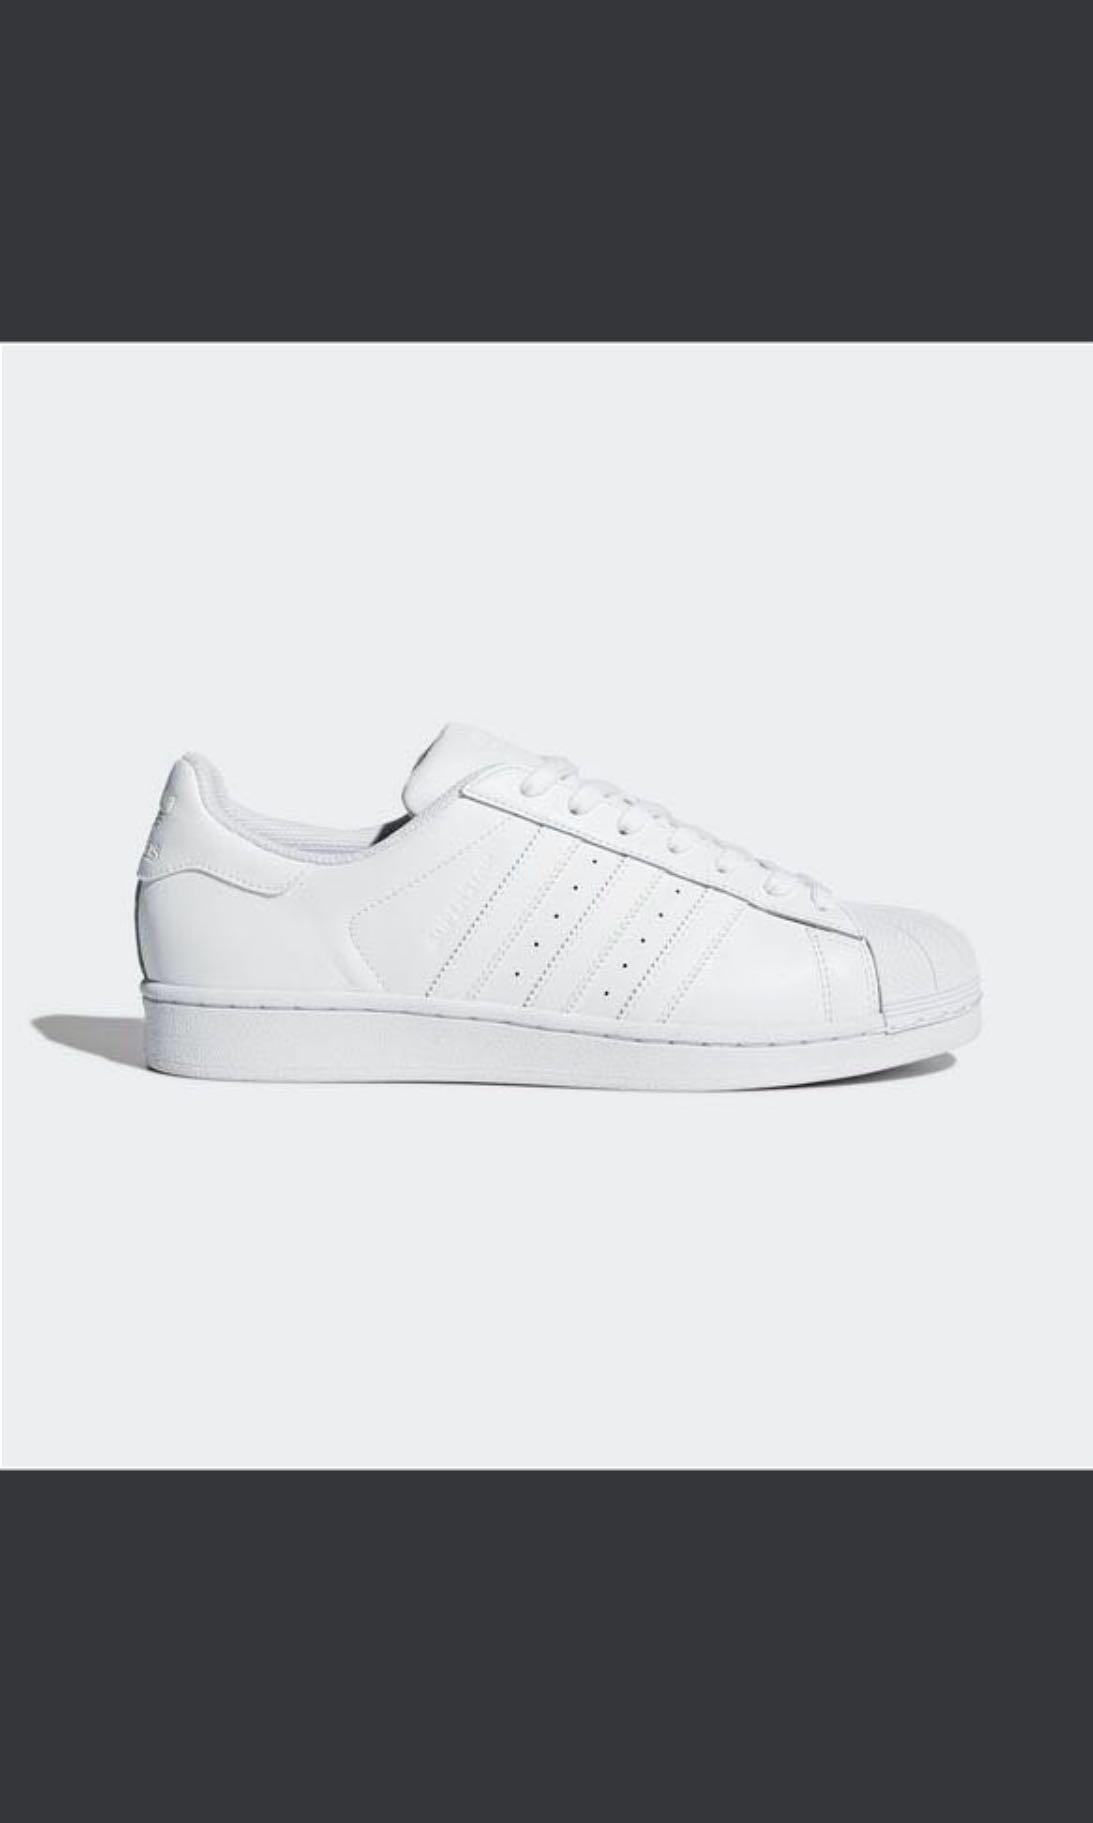 adidas shoes sneakers white